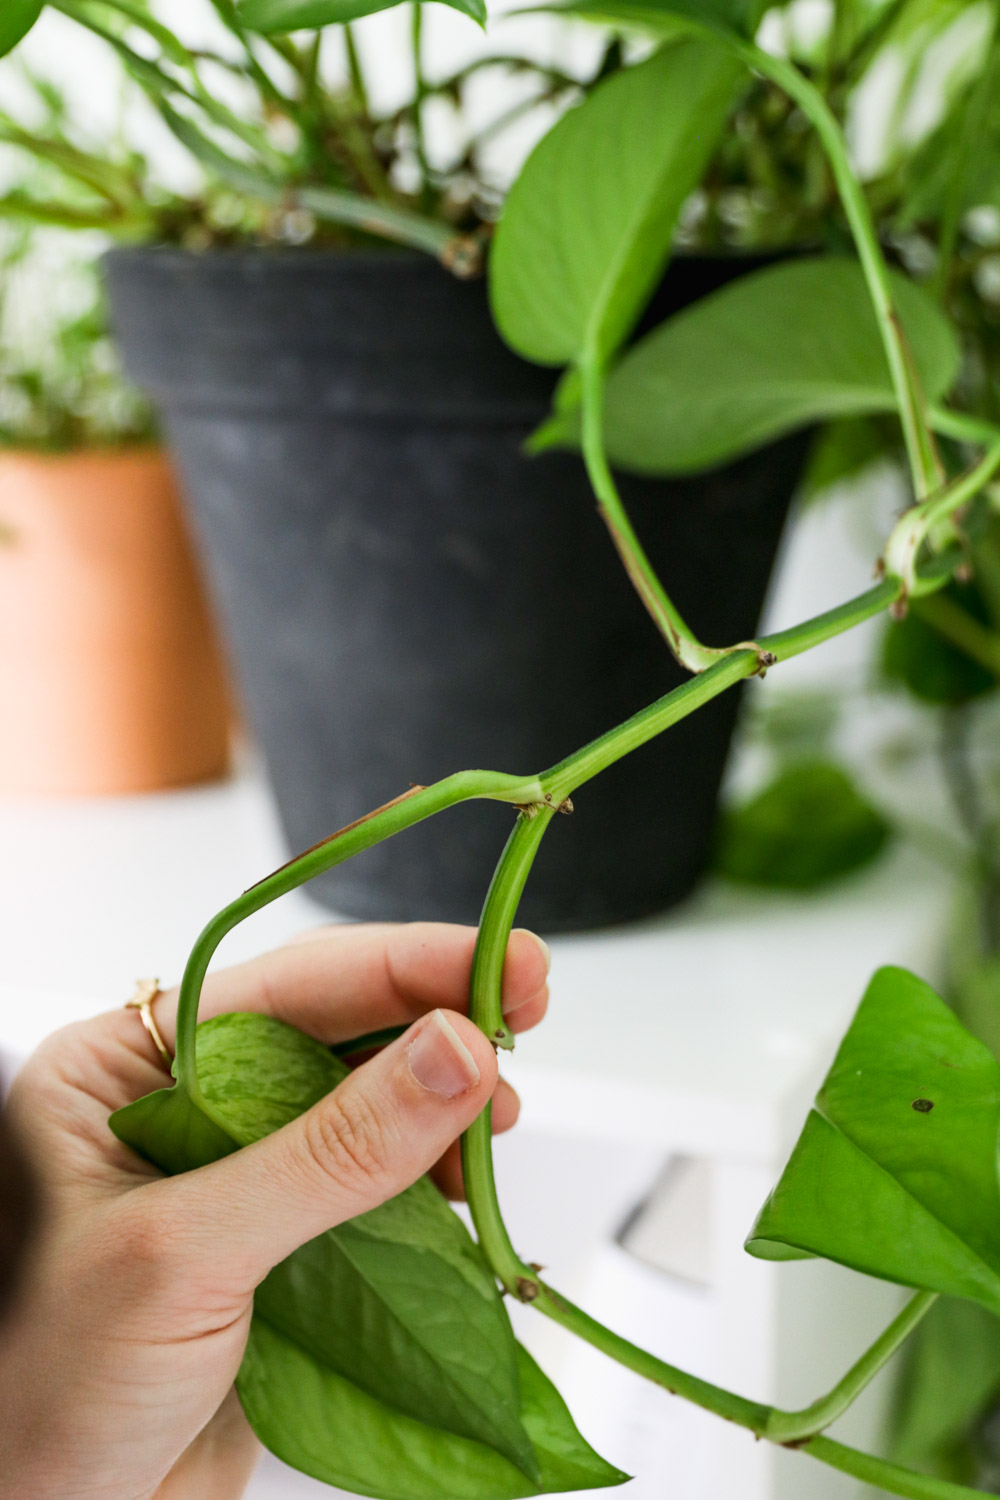 How to Take a Cutting from a Plant